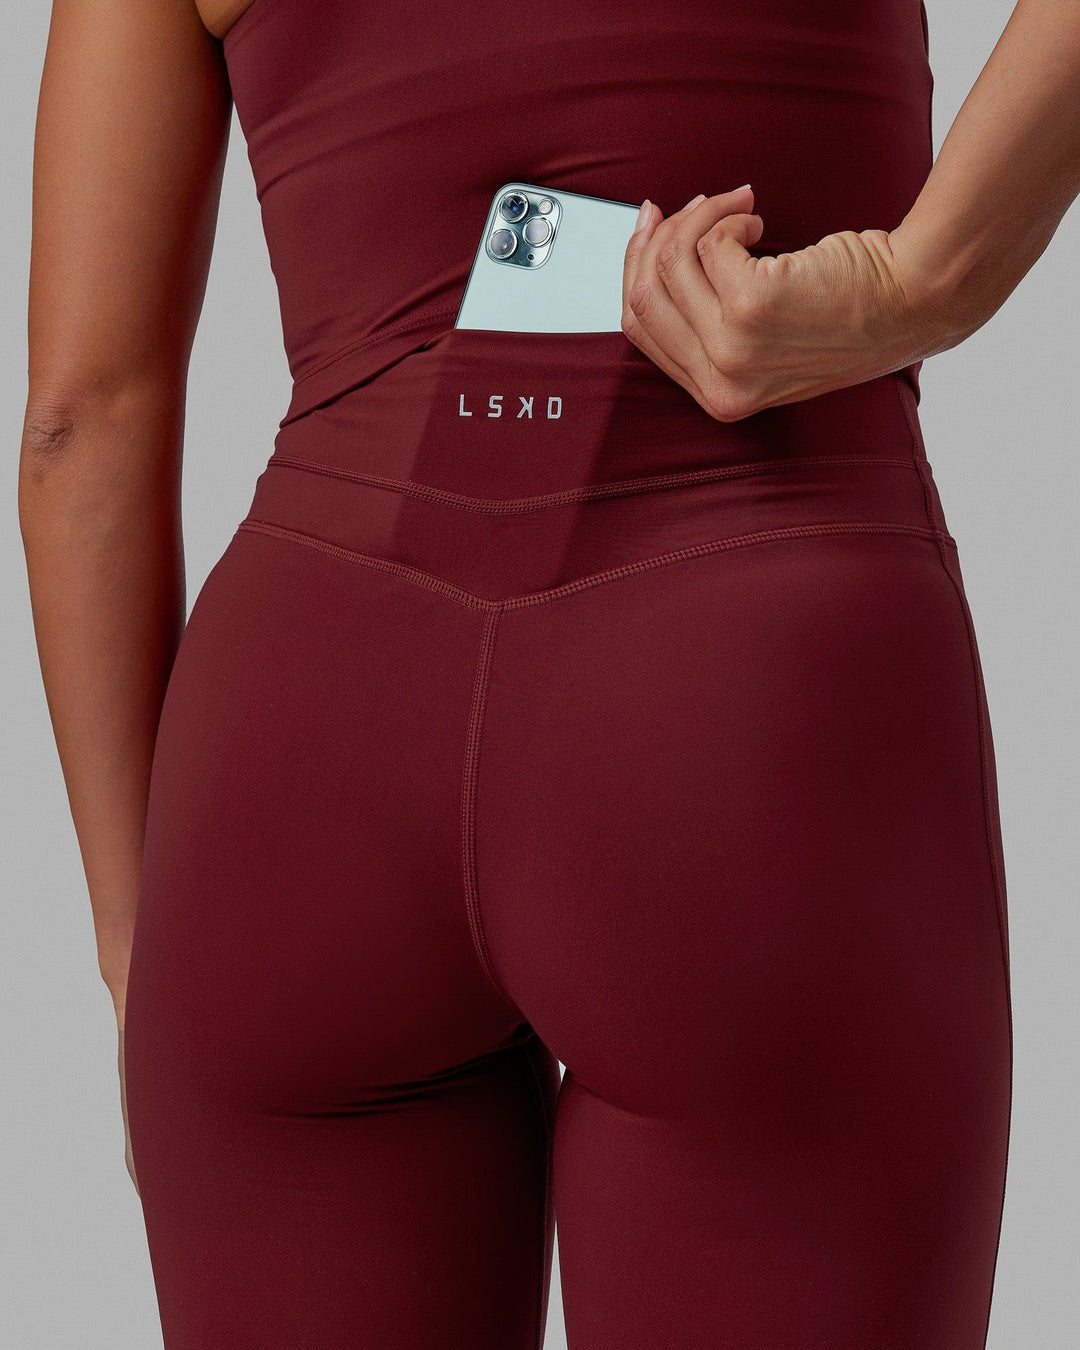 Woman wearing Enhance Full Length Tights - Cranberry